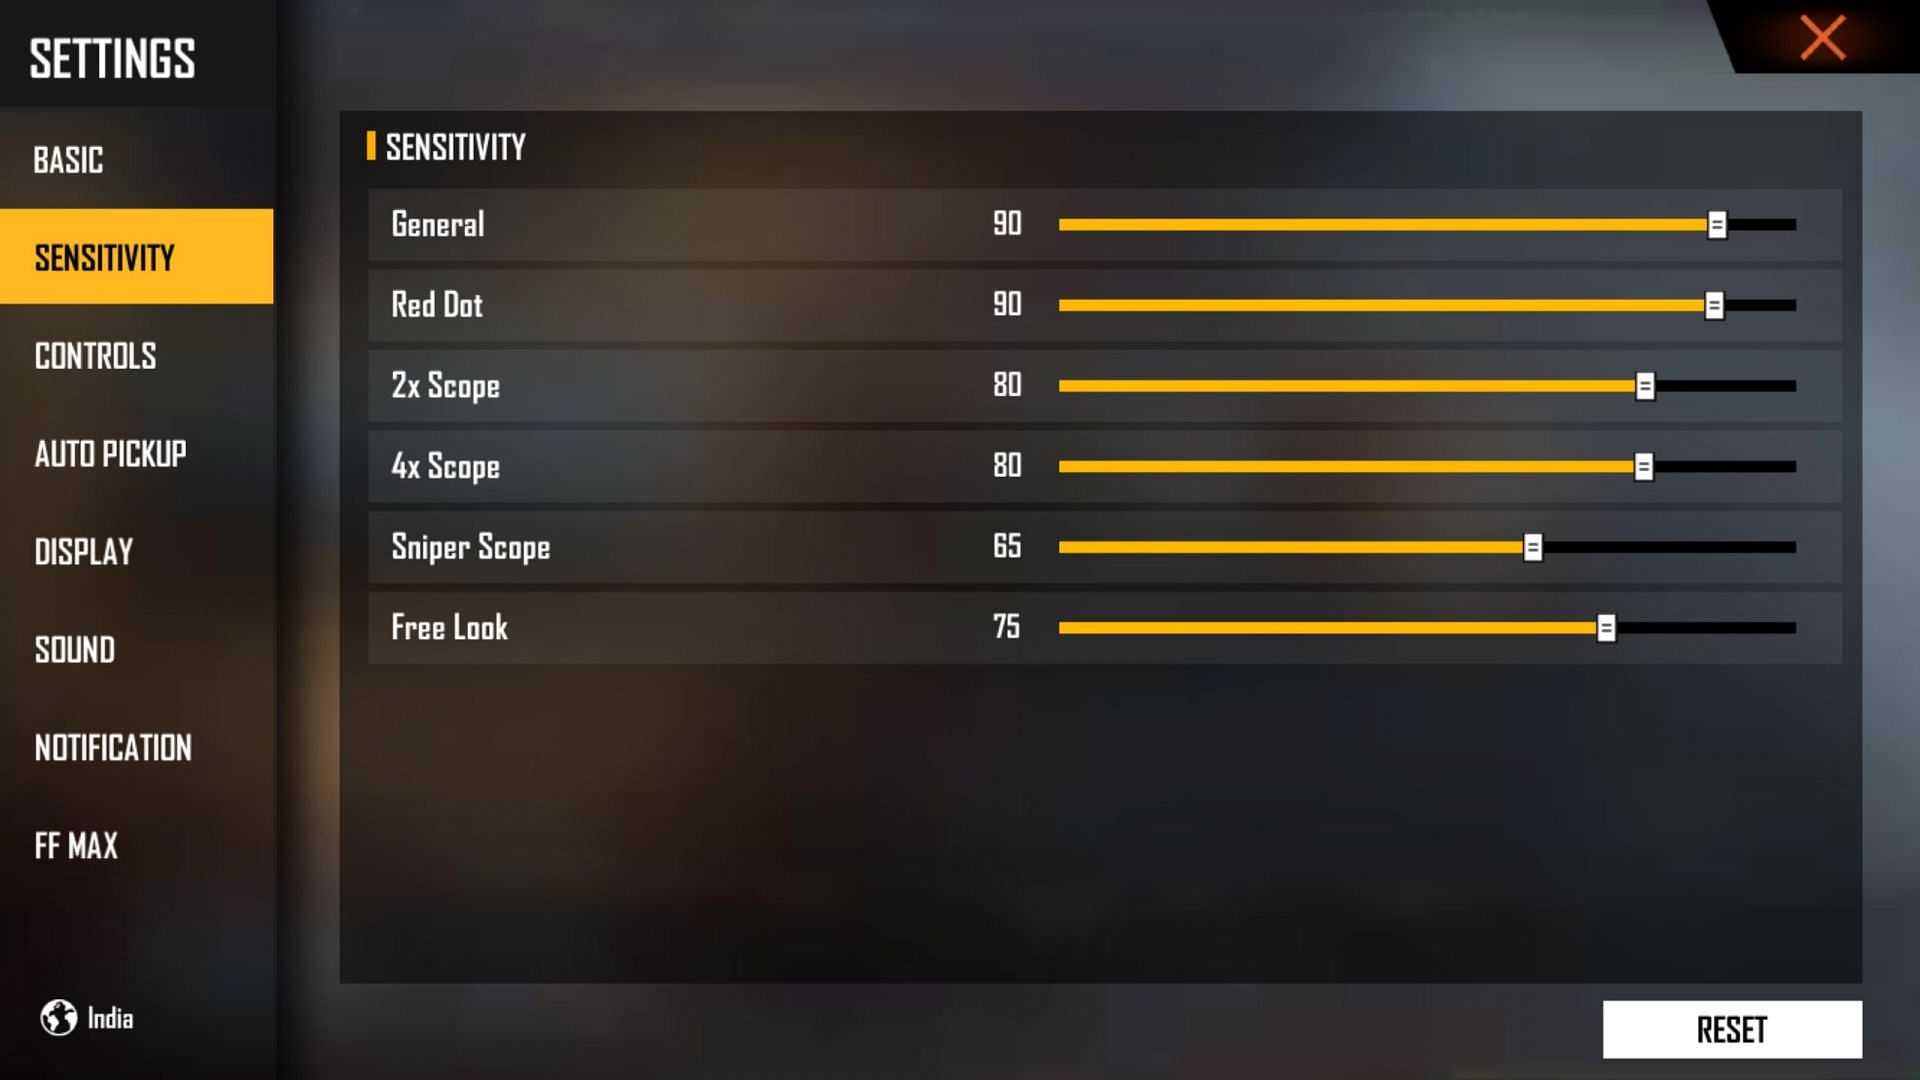 Here are the best settings that users can try out for headshots and accuracy (Image via Garena)